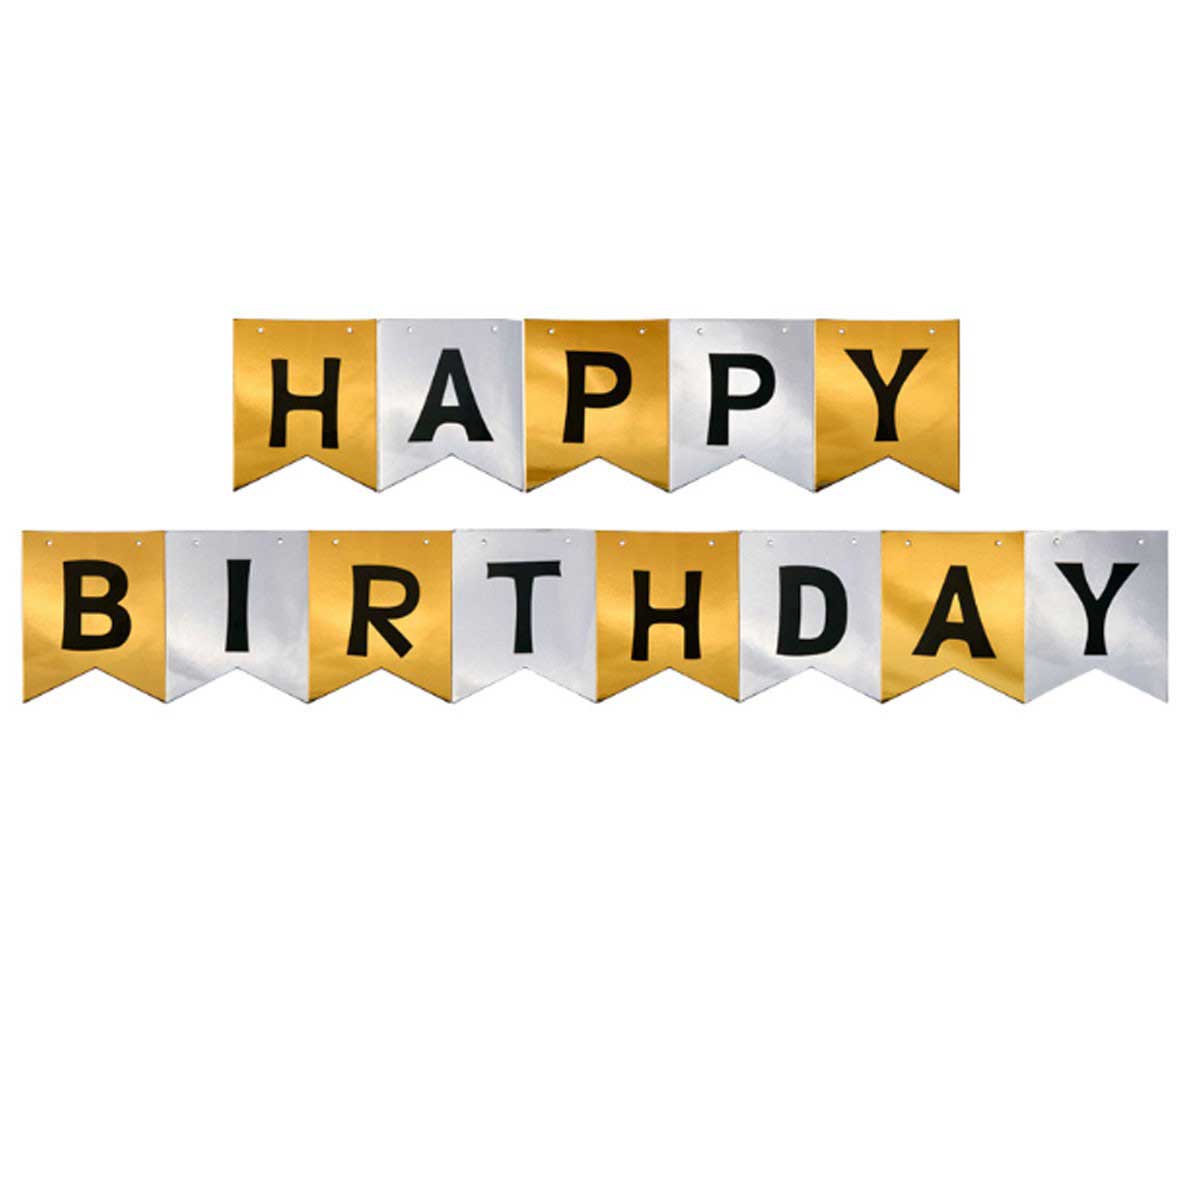 "Happy Birthday" banner in Shiny and glossy silver and gold in alternate letters.